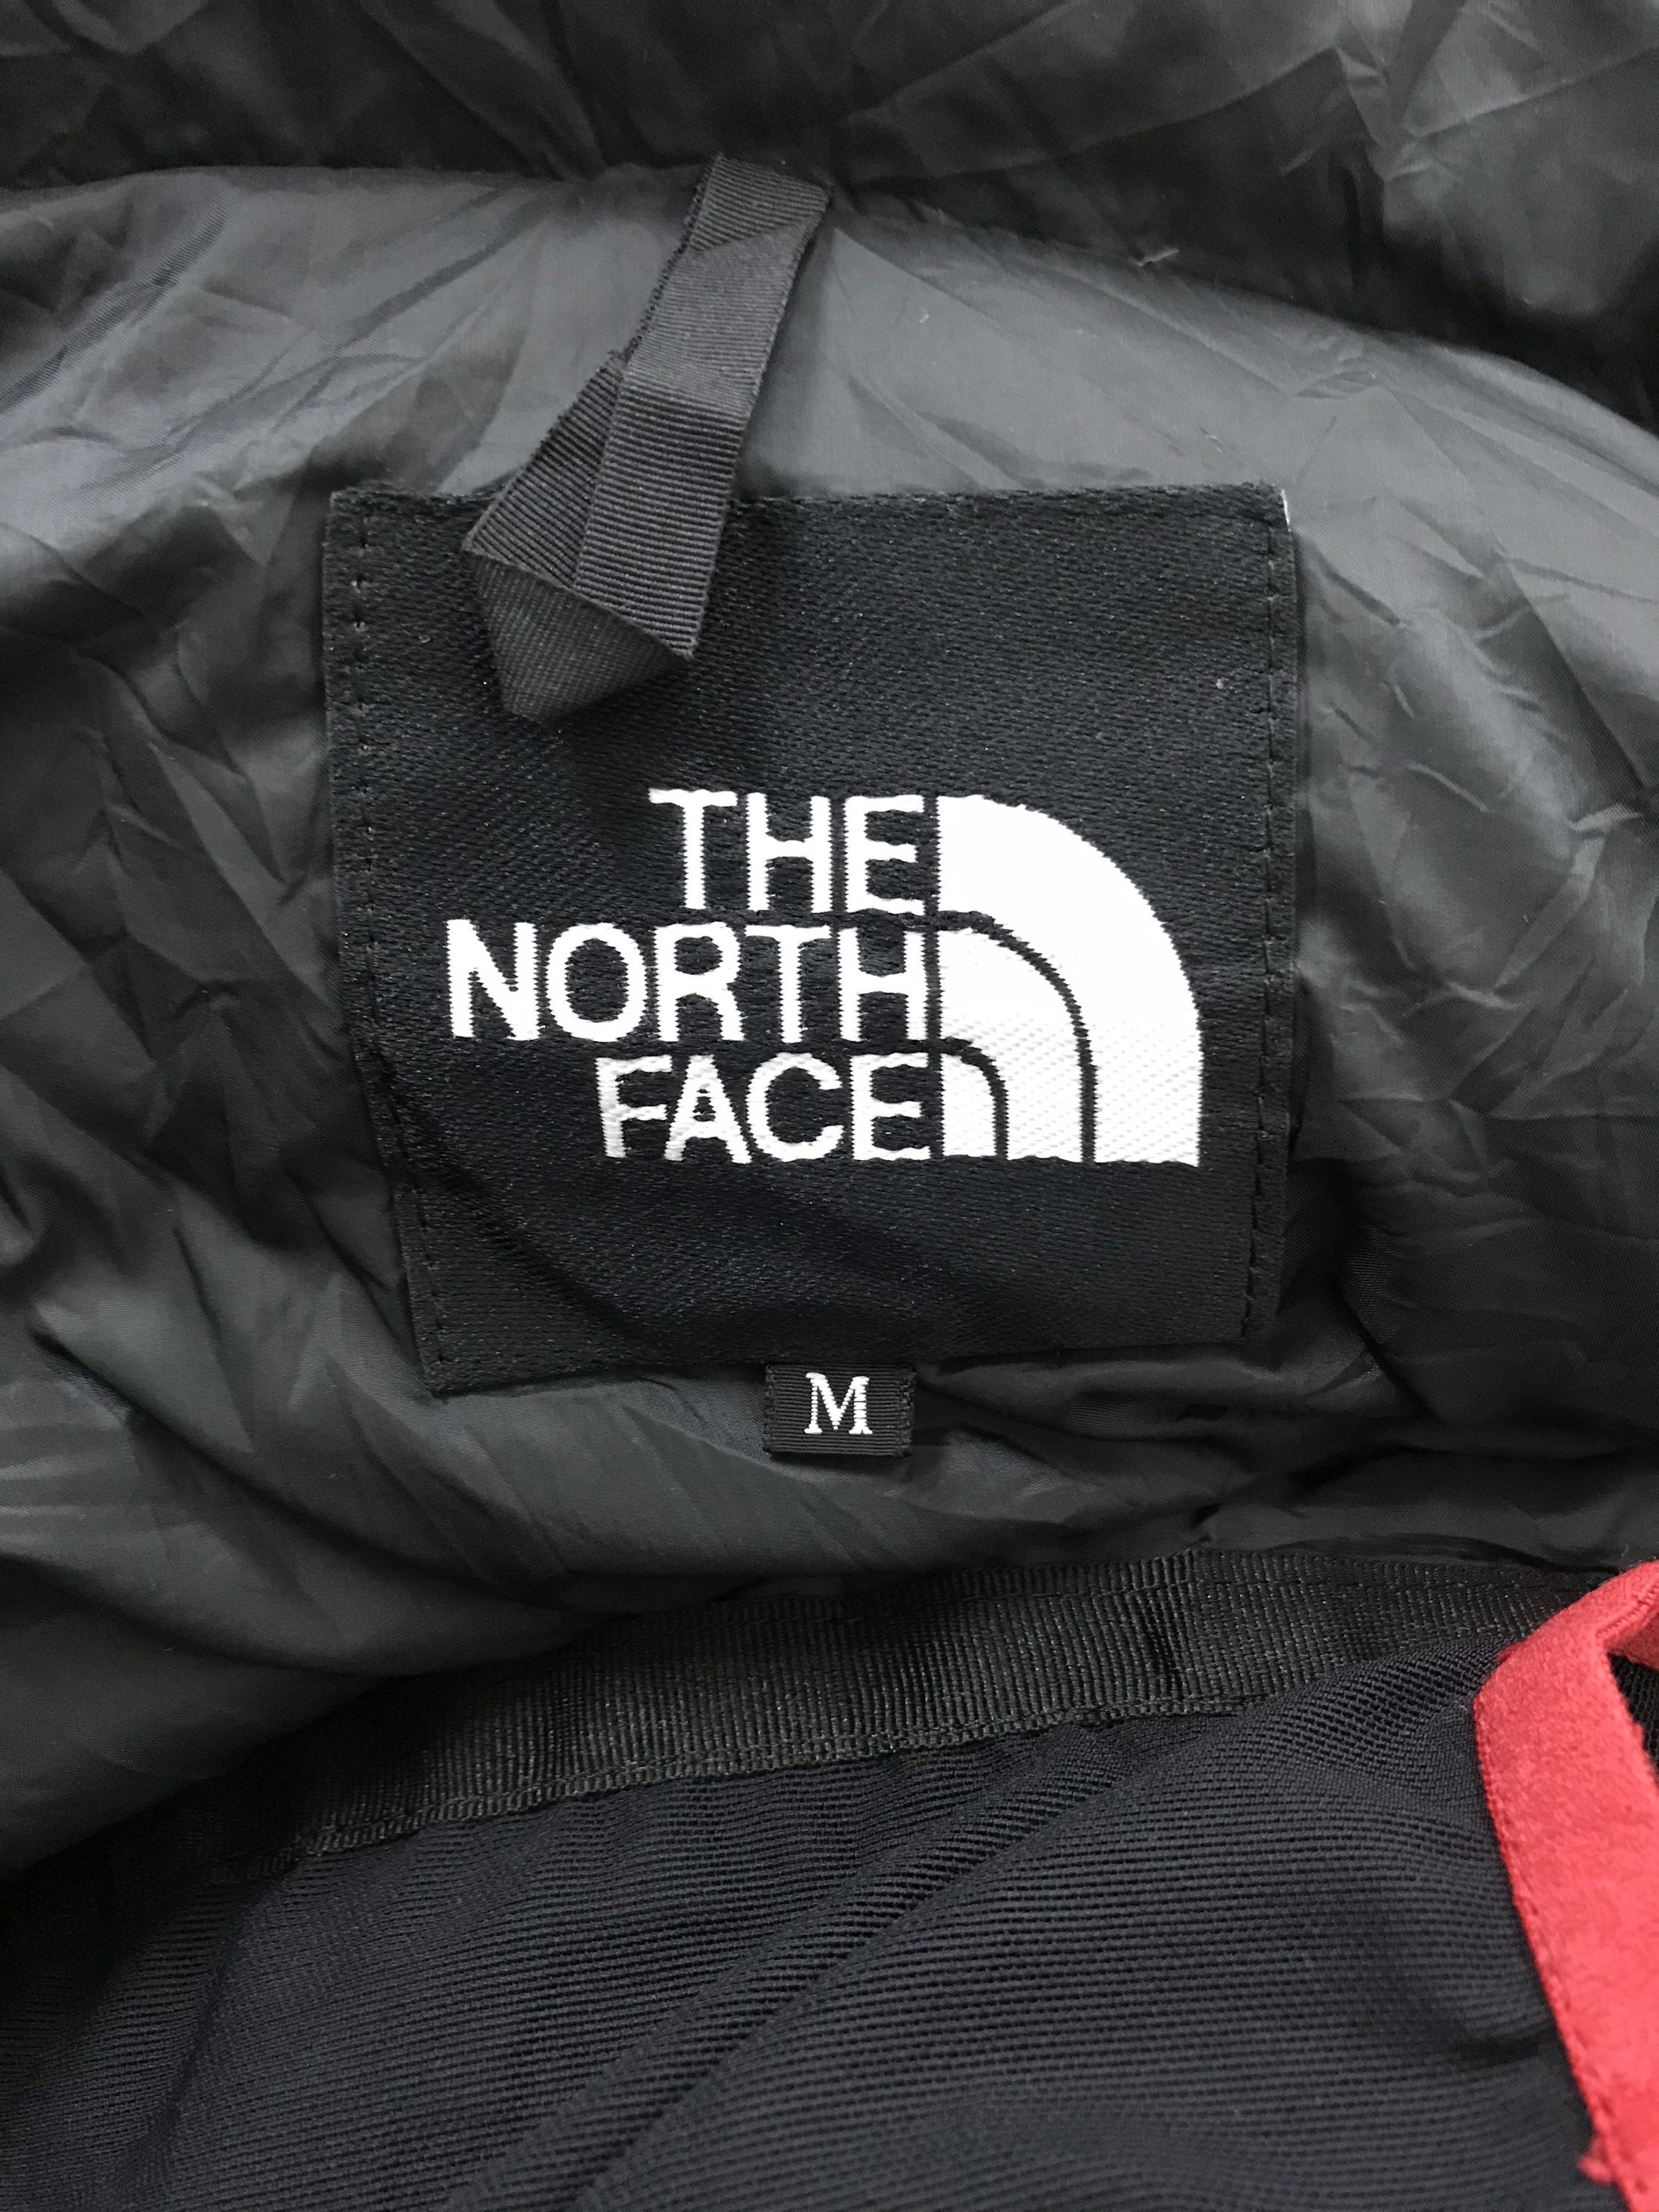 The North Face Puffer Hoodie Jacket | Etsy